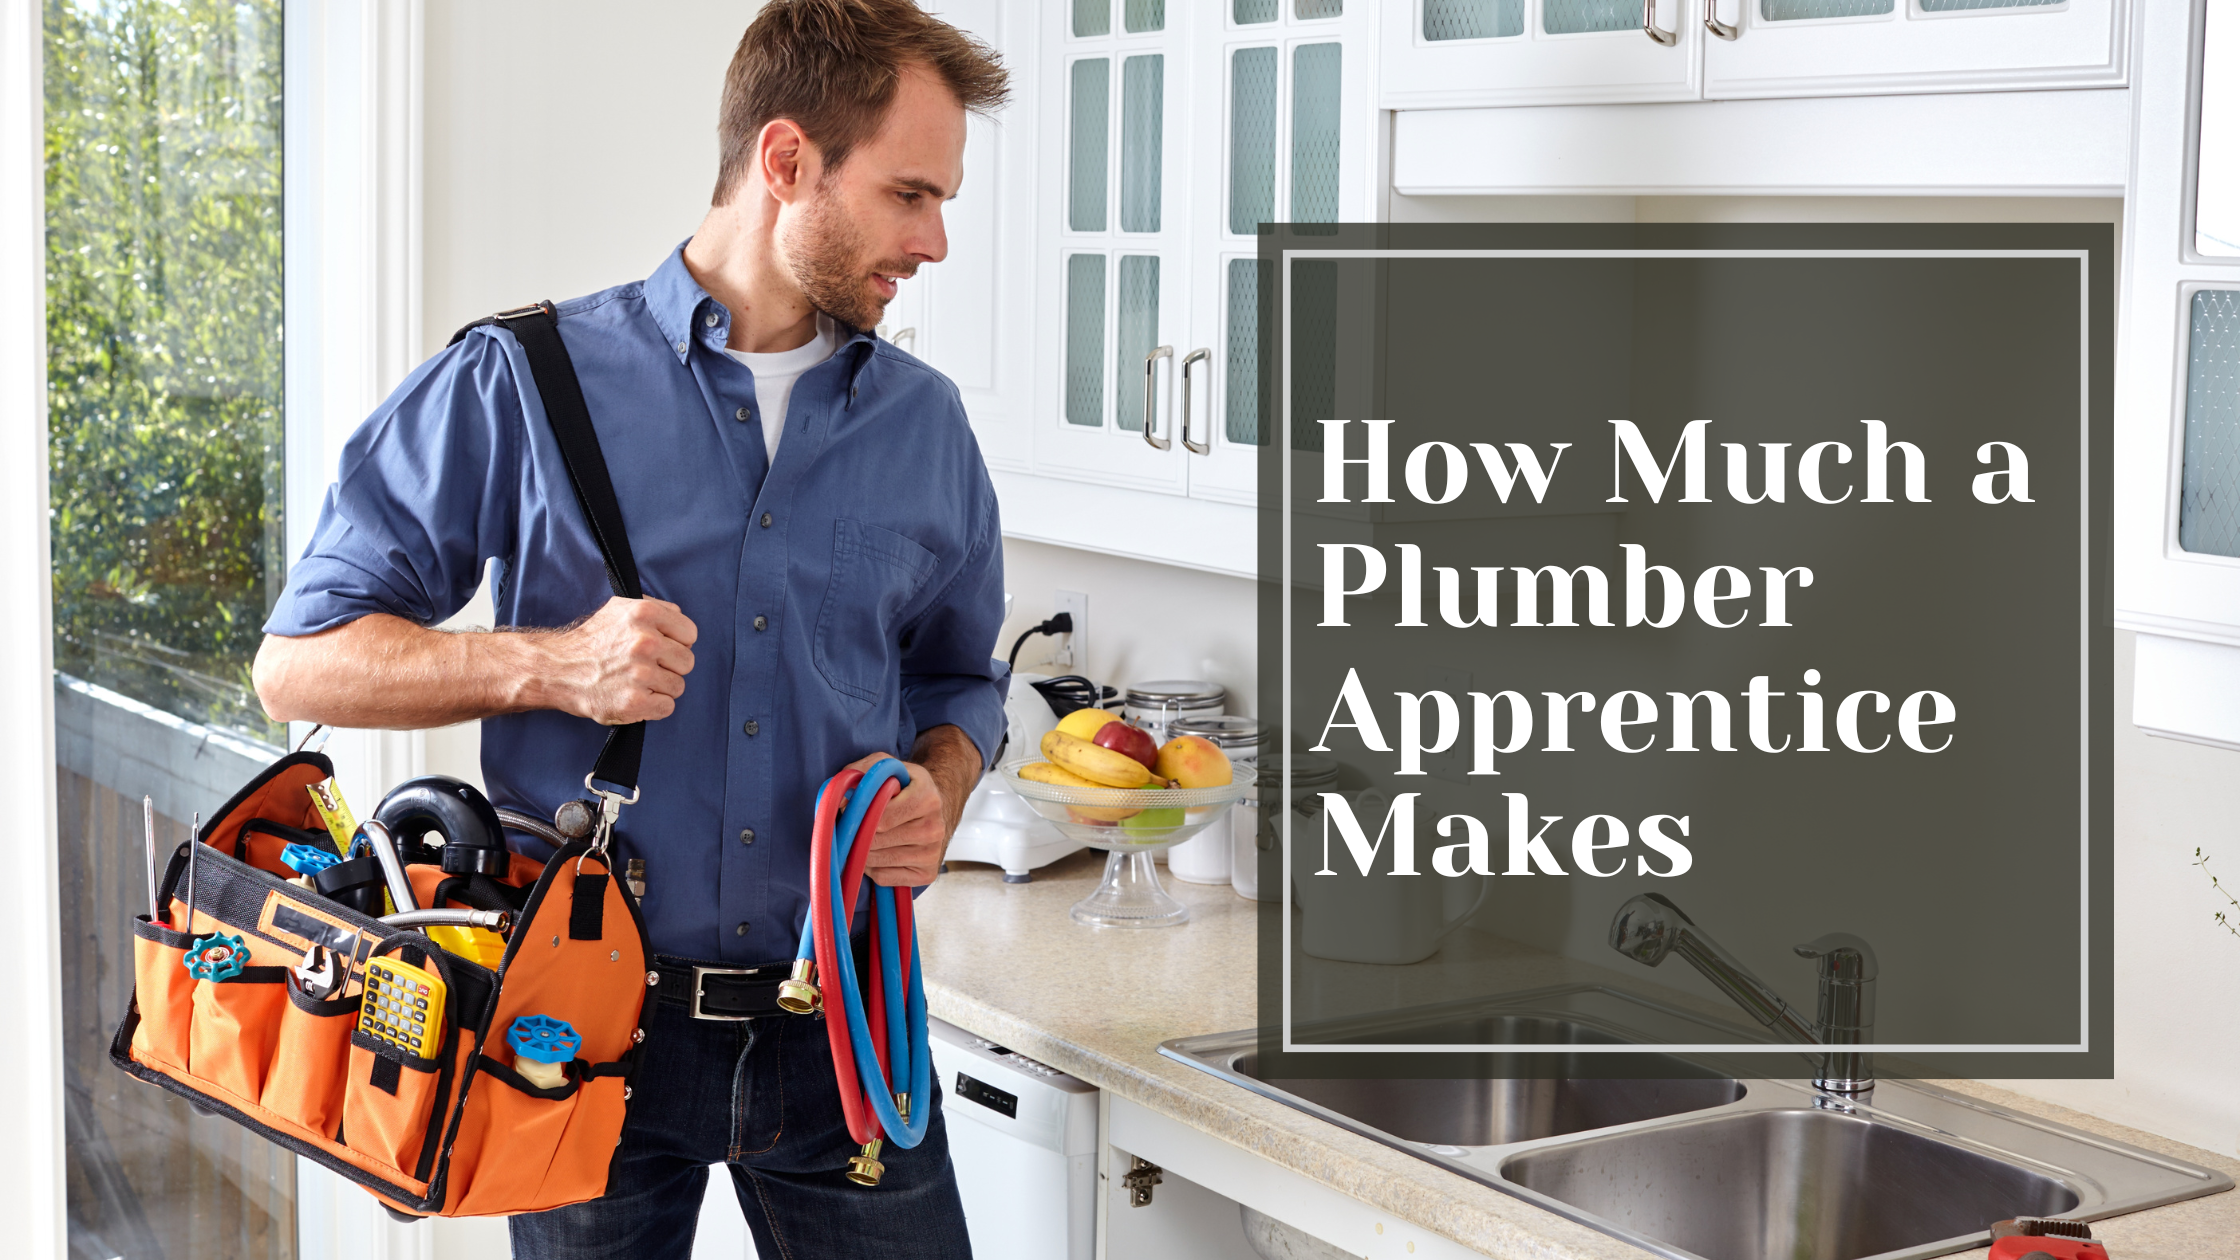 How Much a Plumber Apprentice Makes